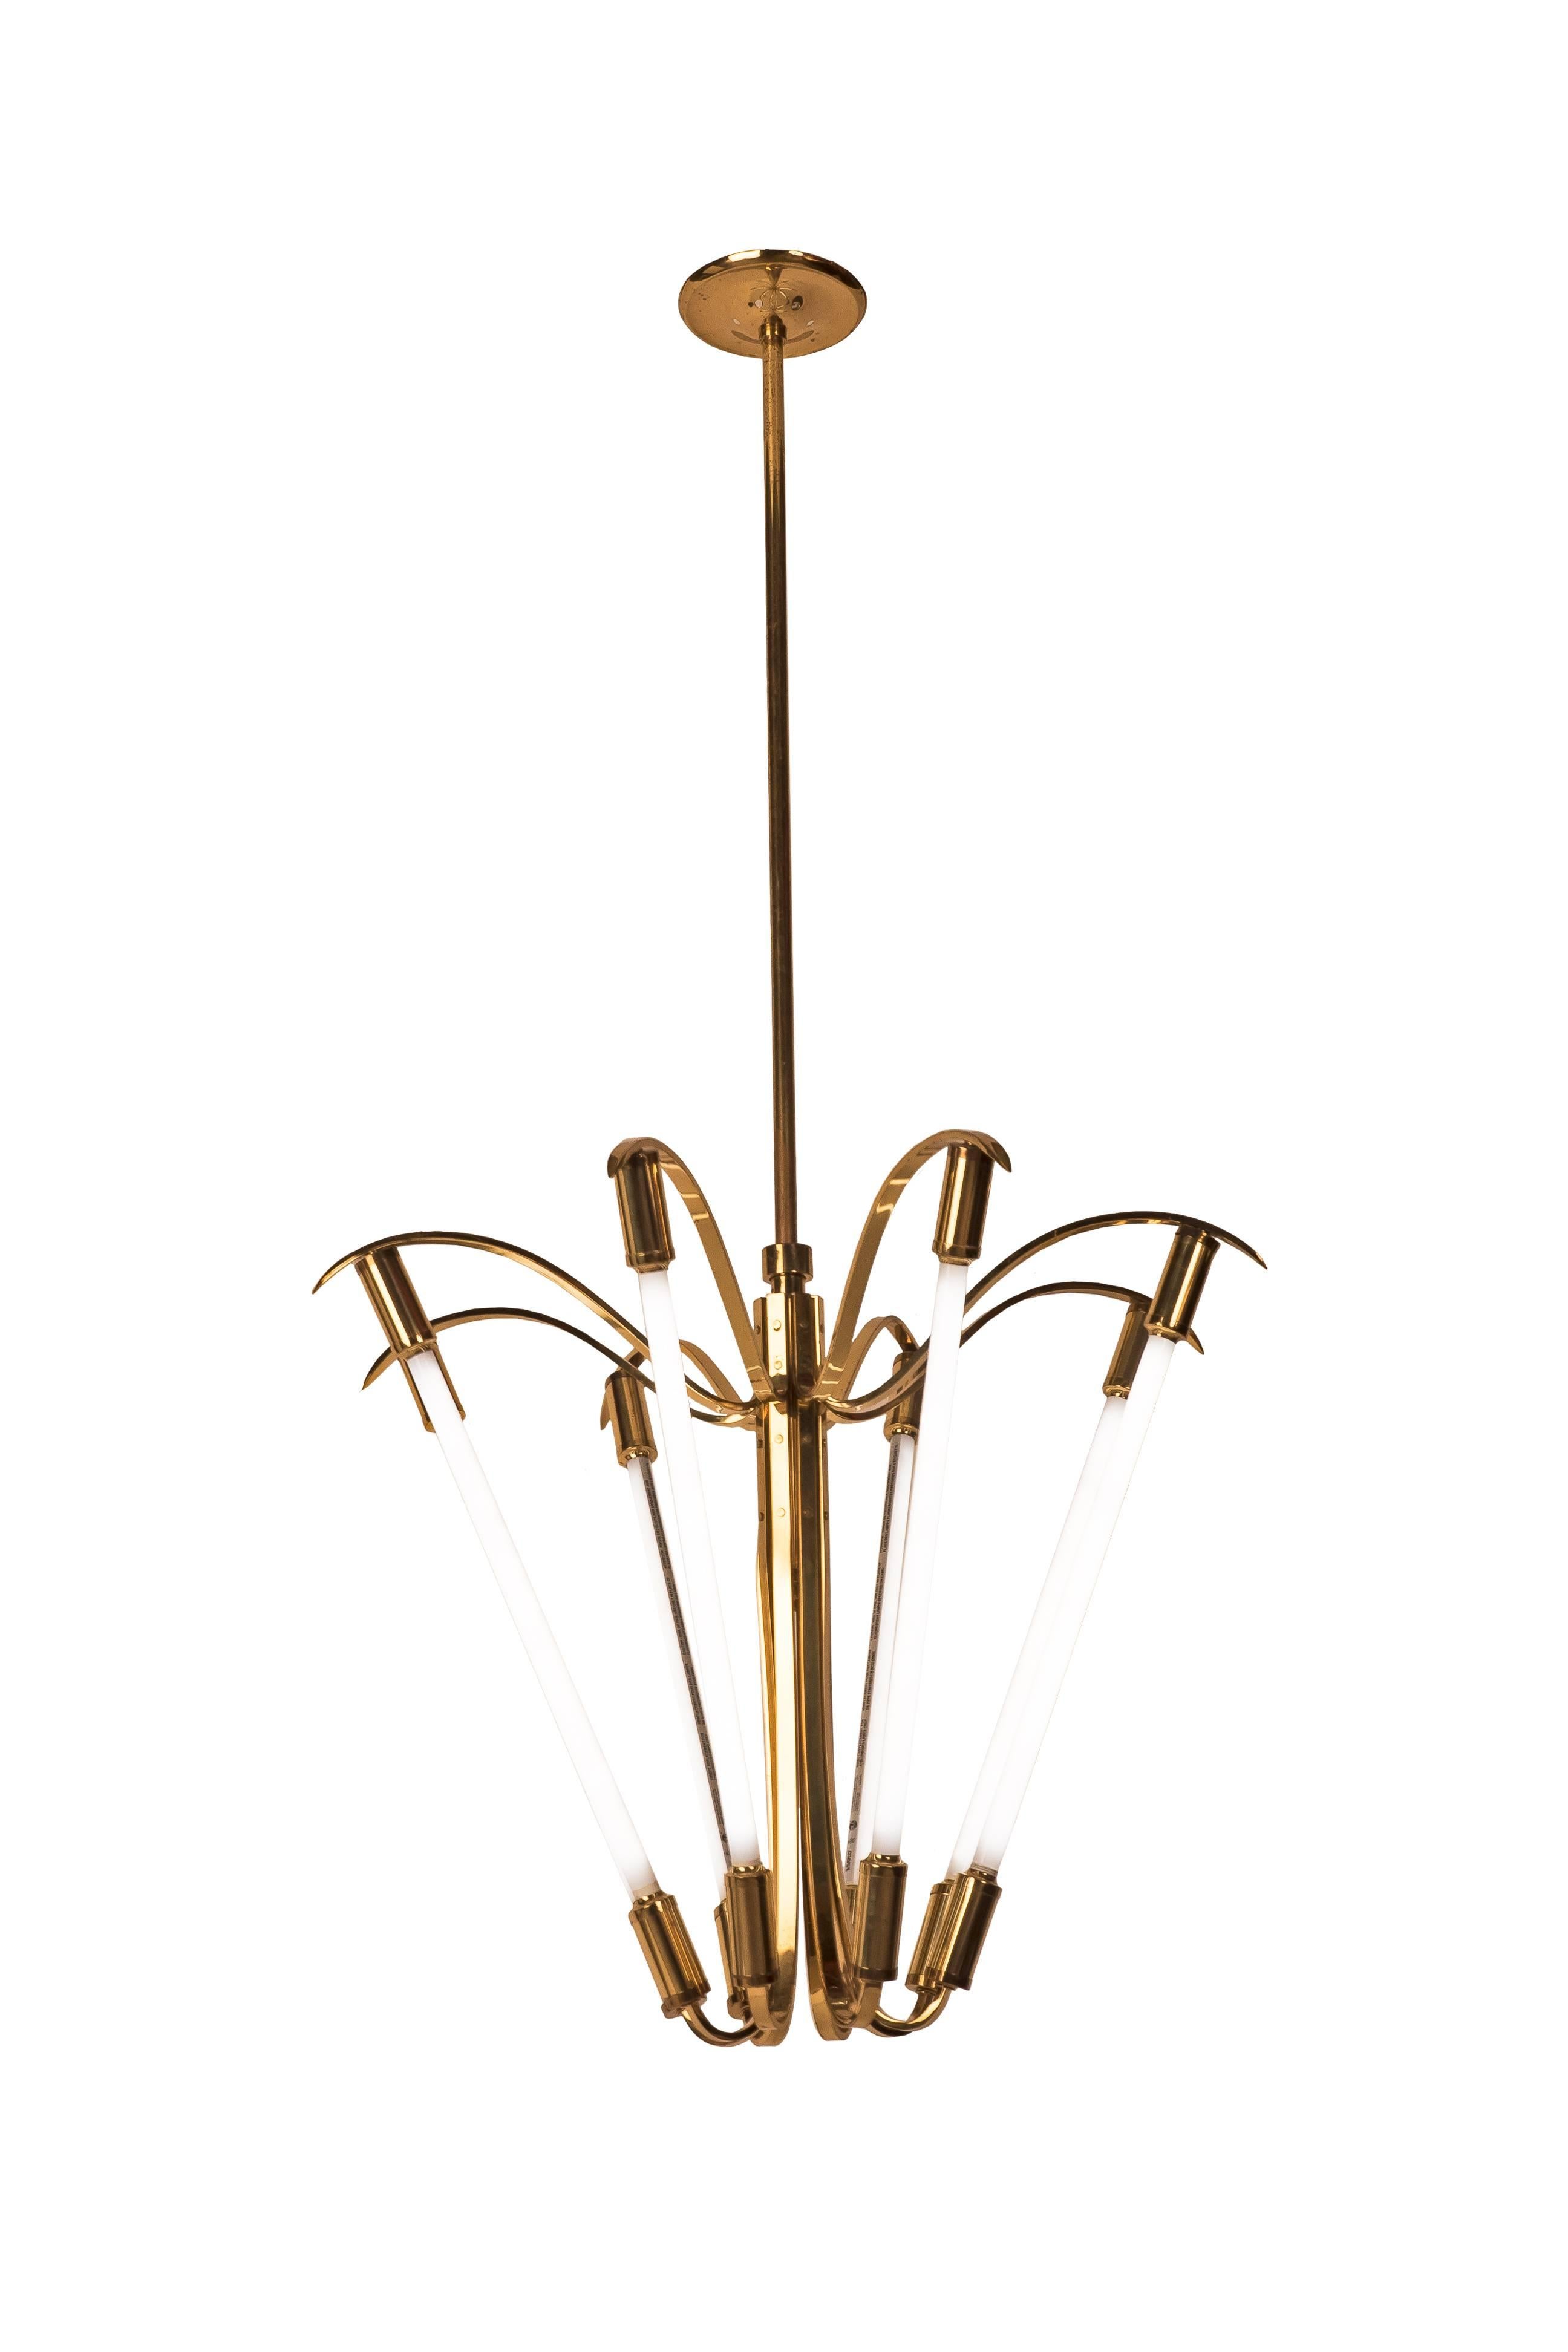 This captivating grand German Art Deco chandelier features a harp form design rewired to take LED tubes for a warmer and softer look. It has a Minimalist design inspired by the Bauhaus movement.